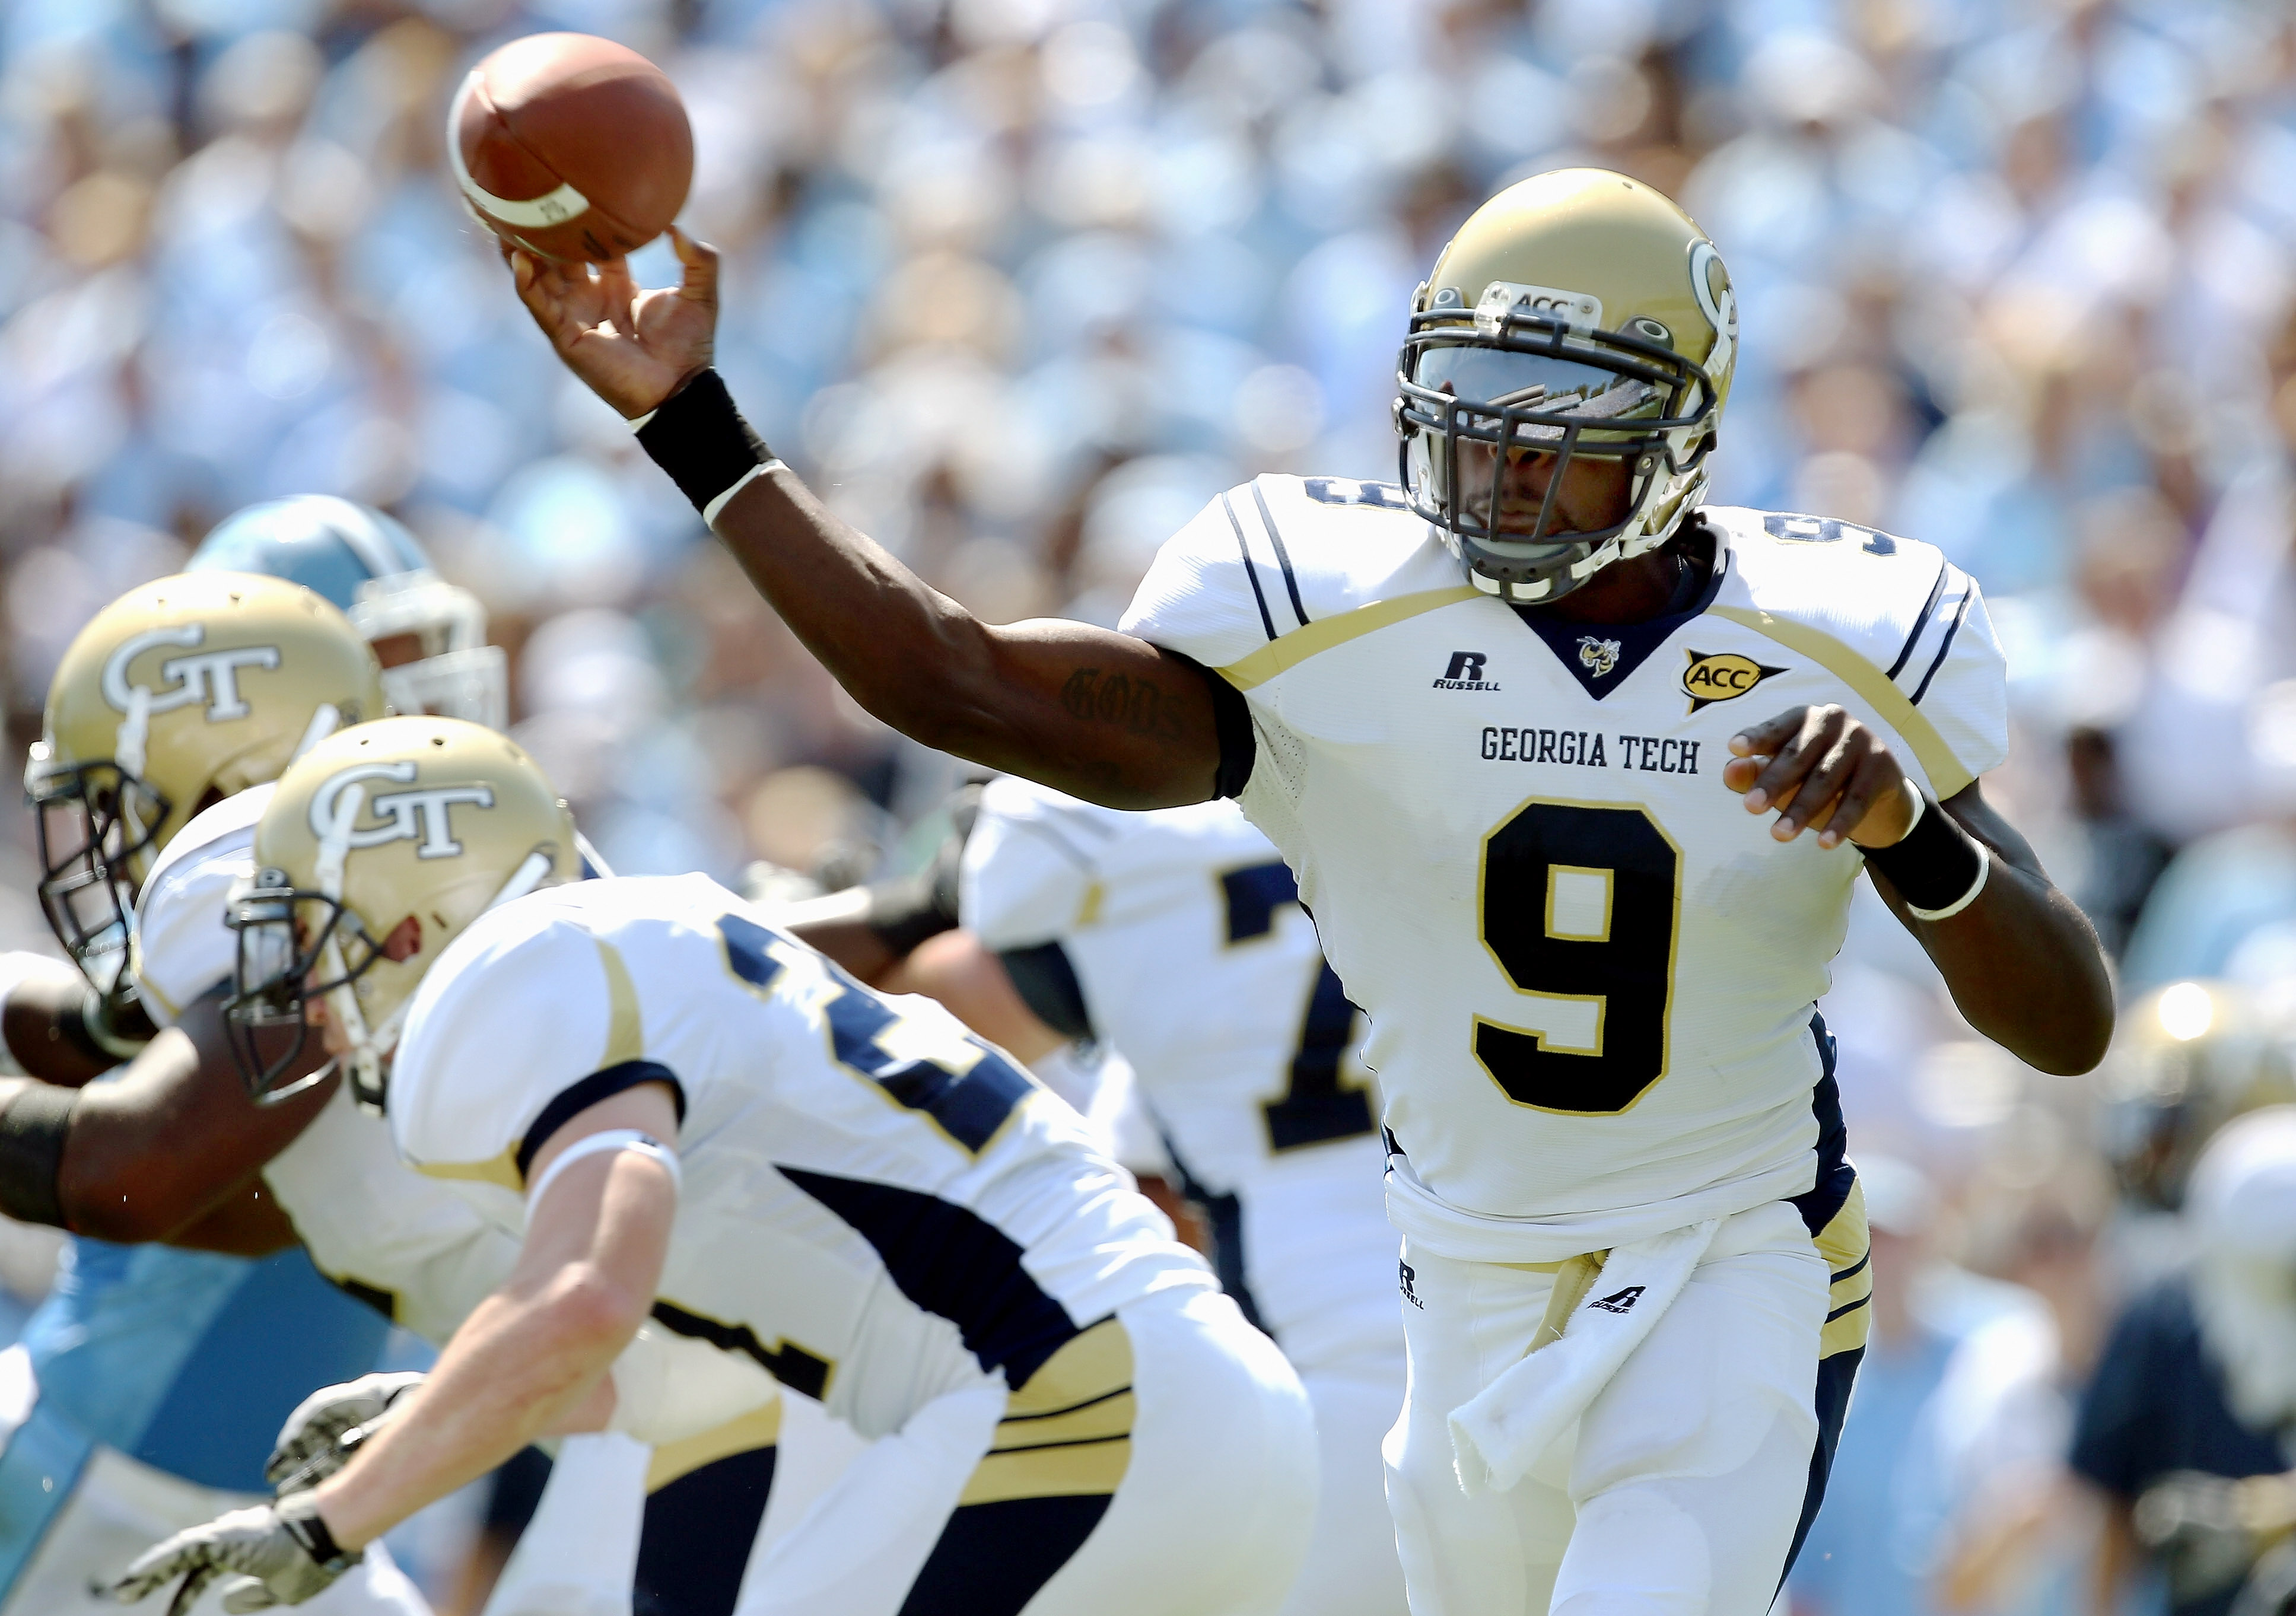 CHAPEL HILL, NC - SEPTEMBER 18:  Joshua Nesbitt #9 of the Georgia Tech Yellow Jackets throws a pass against the North Carolina Tar Heels during their game at Kenan Stadium on September 18, 2010 in Chapel Hill, North Carolina.  (Photo by Streeter Lecka/Get